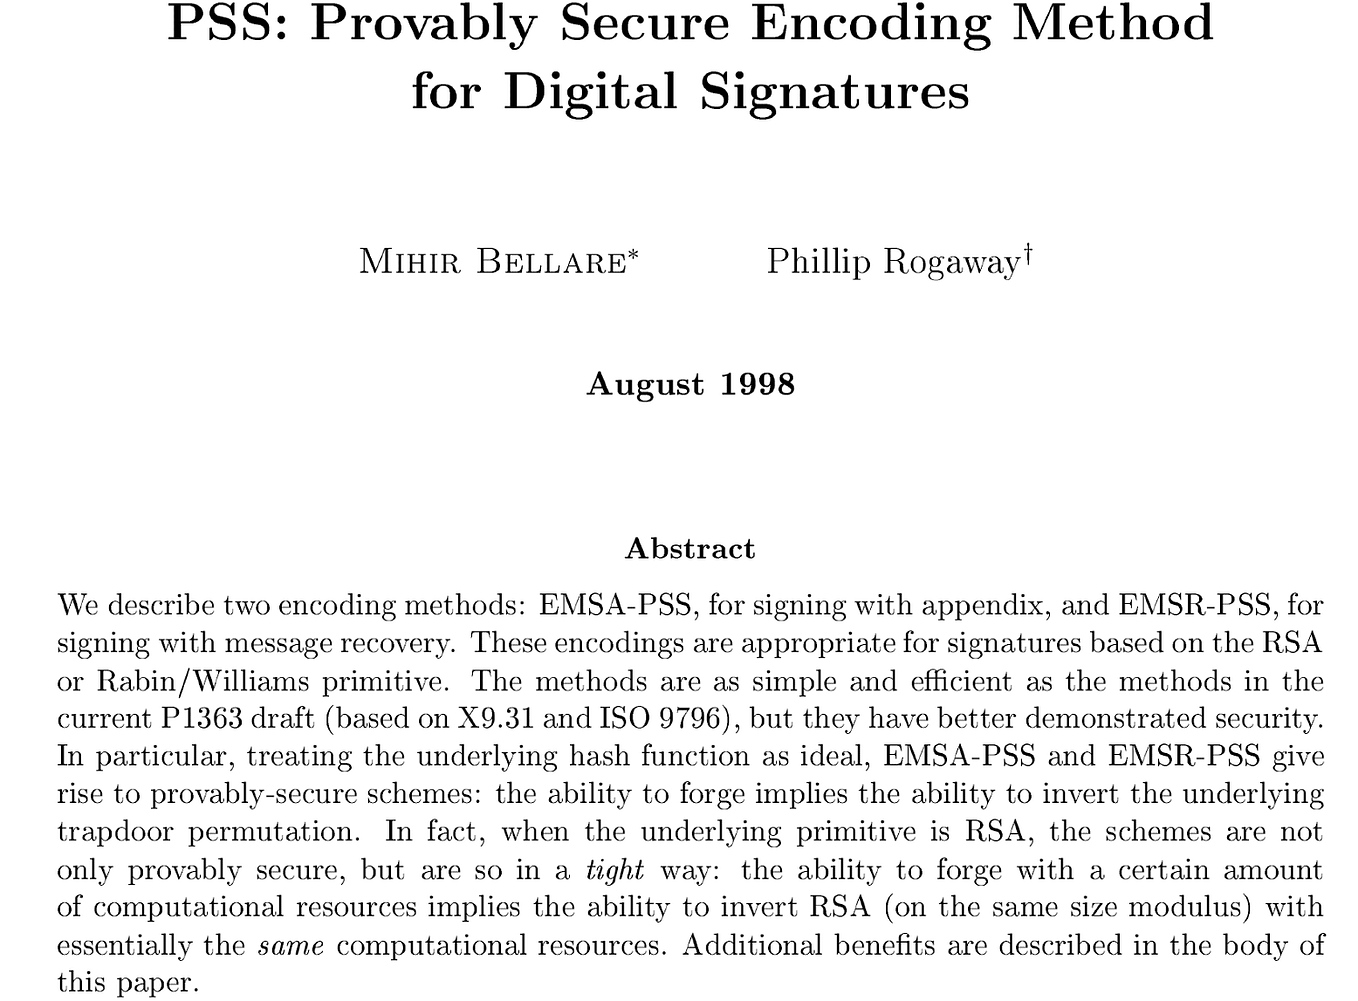 Provable Secure Signatures with RSA